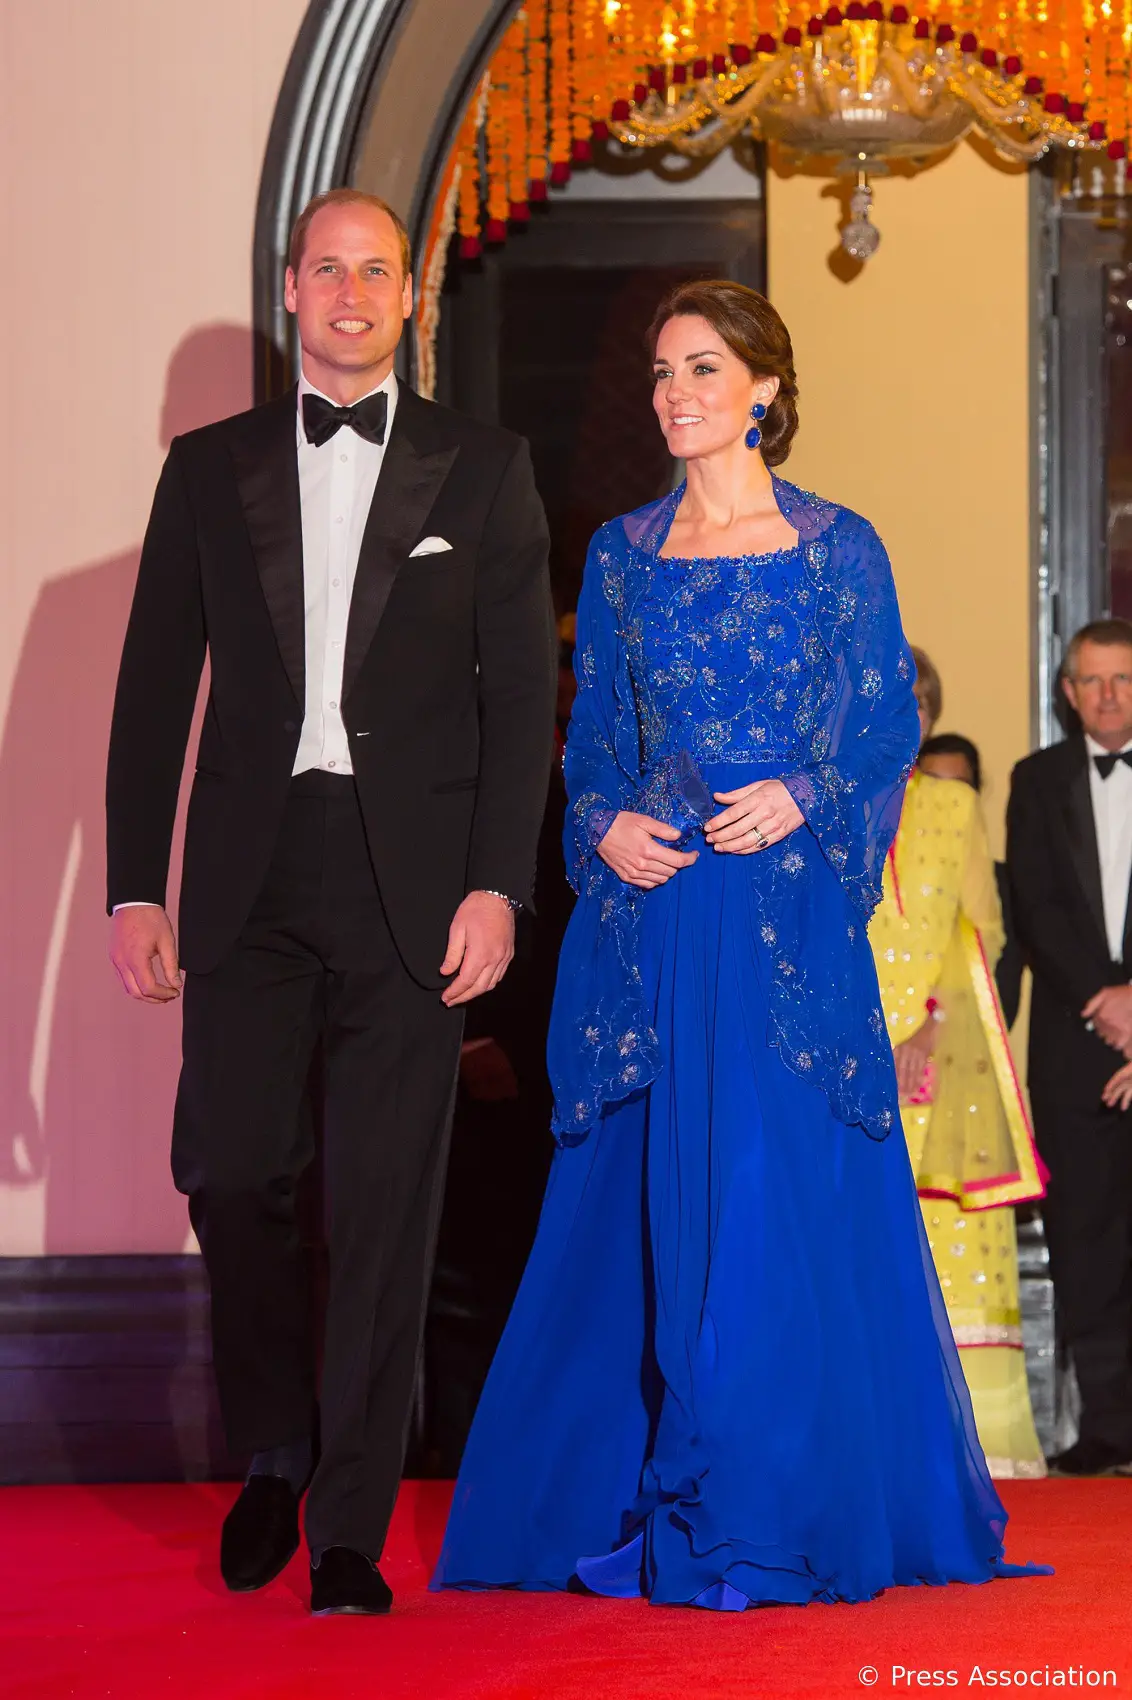 The Duke and Duchess of Cambridge attended Bollywood Gala during India Tour in April 2016 (4)